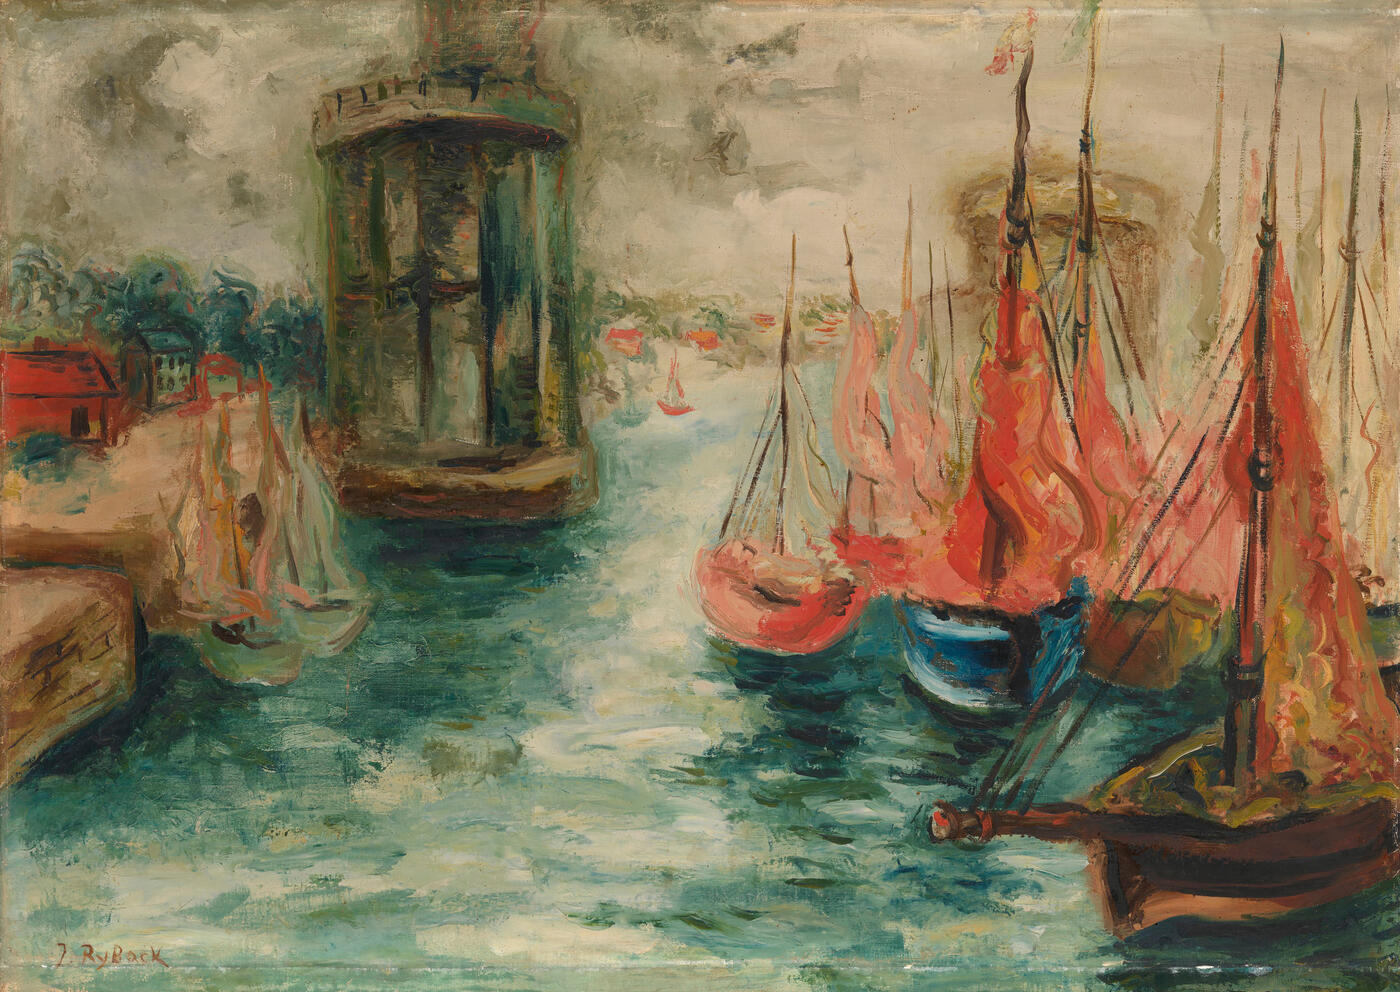 Sailing Boats in a Harbour